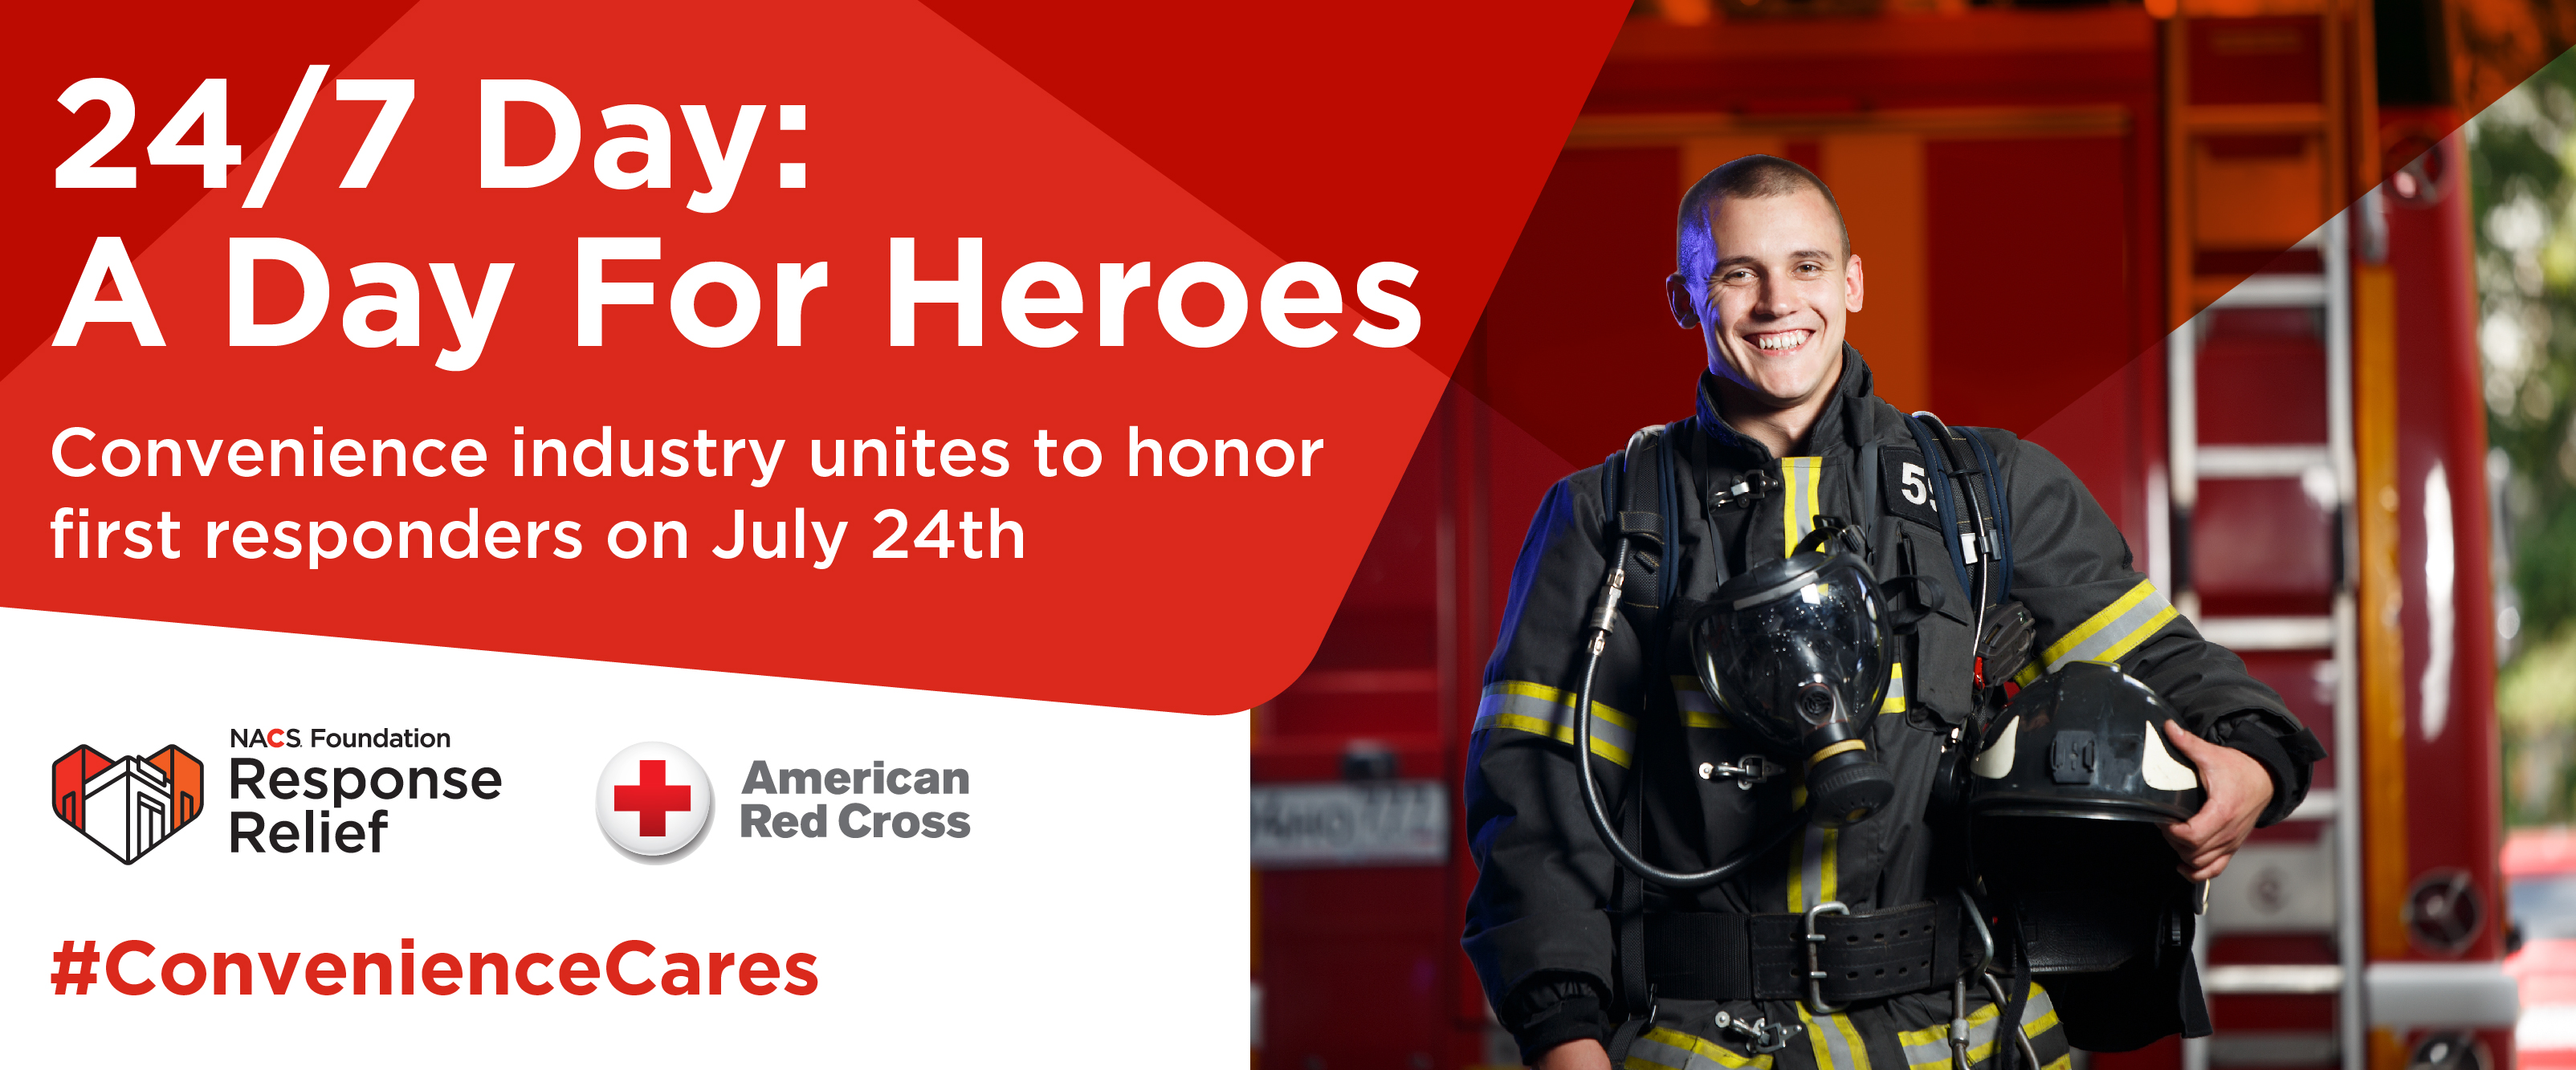 24/7 Heroes Day at Convenience Stores